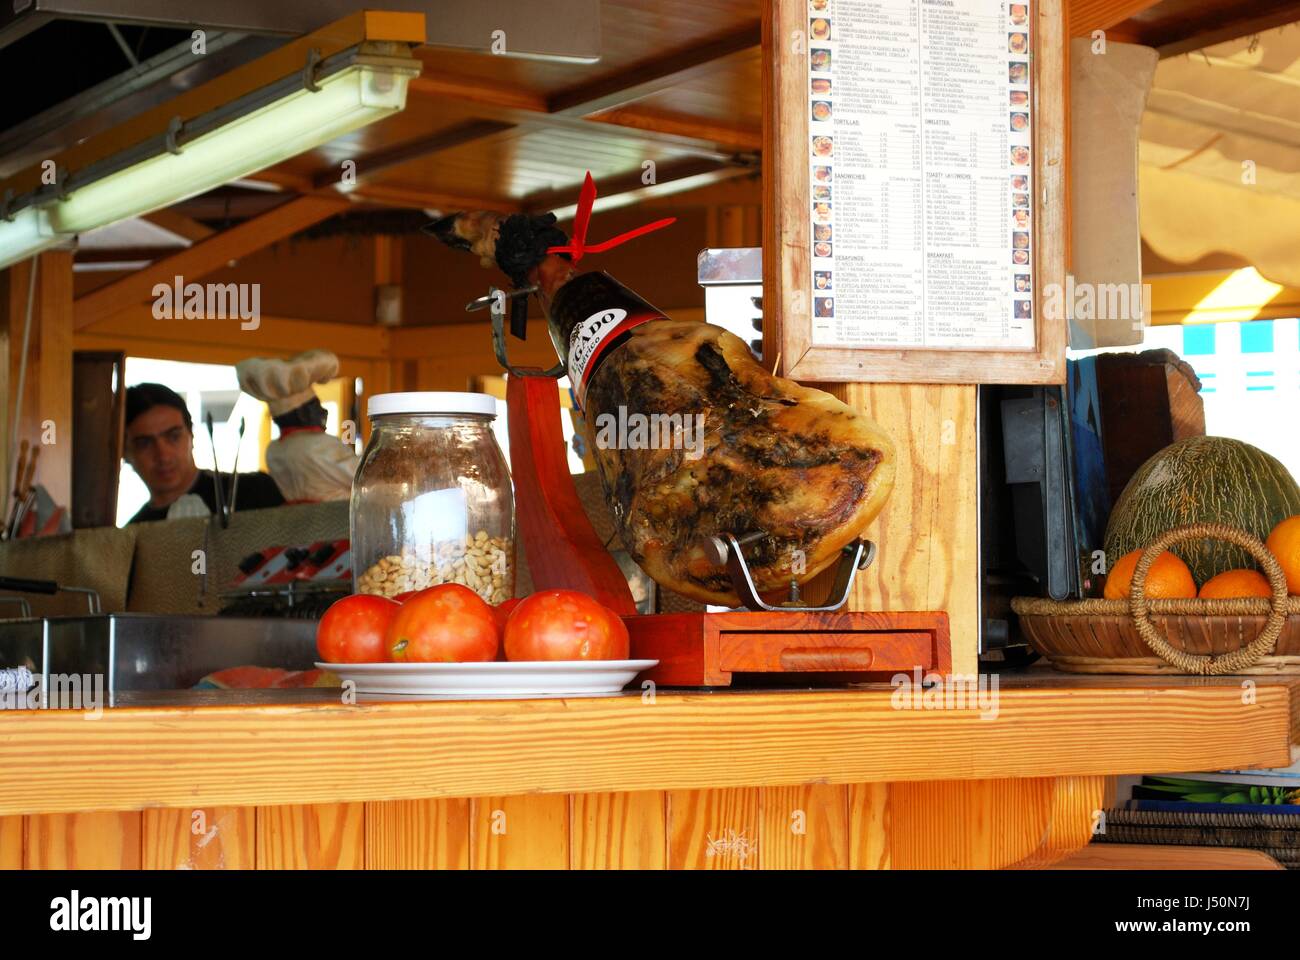 Jamon Serrano ham joint and tomatoes on a beach bar counter along the promenade, Torremolinos, Malaga Province, Andalusia, Spain, Western Europe. Stock Photo